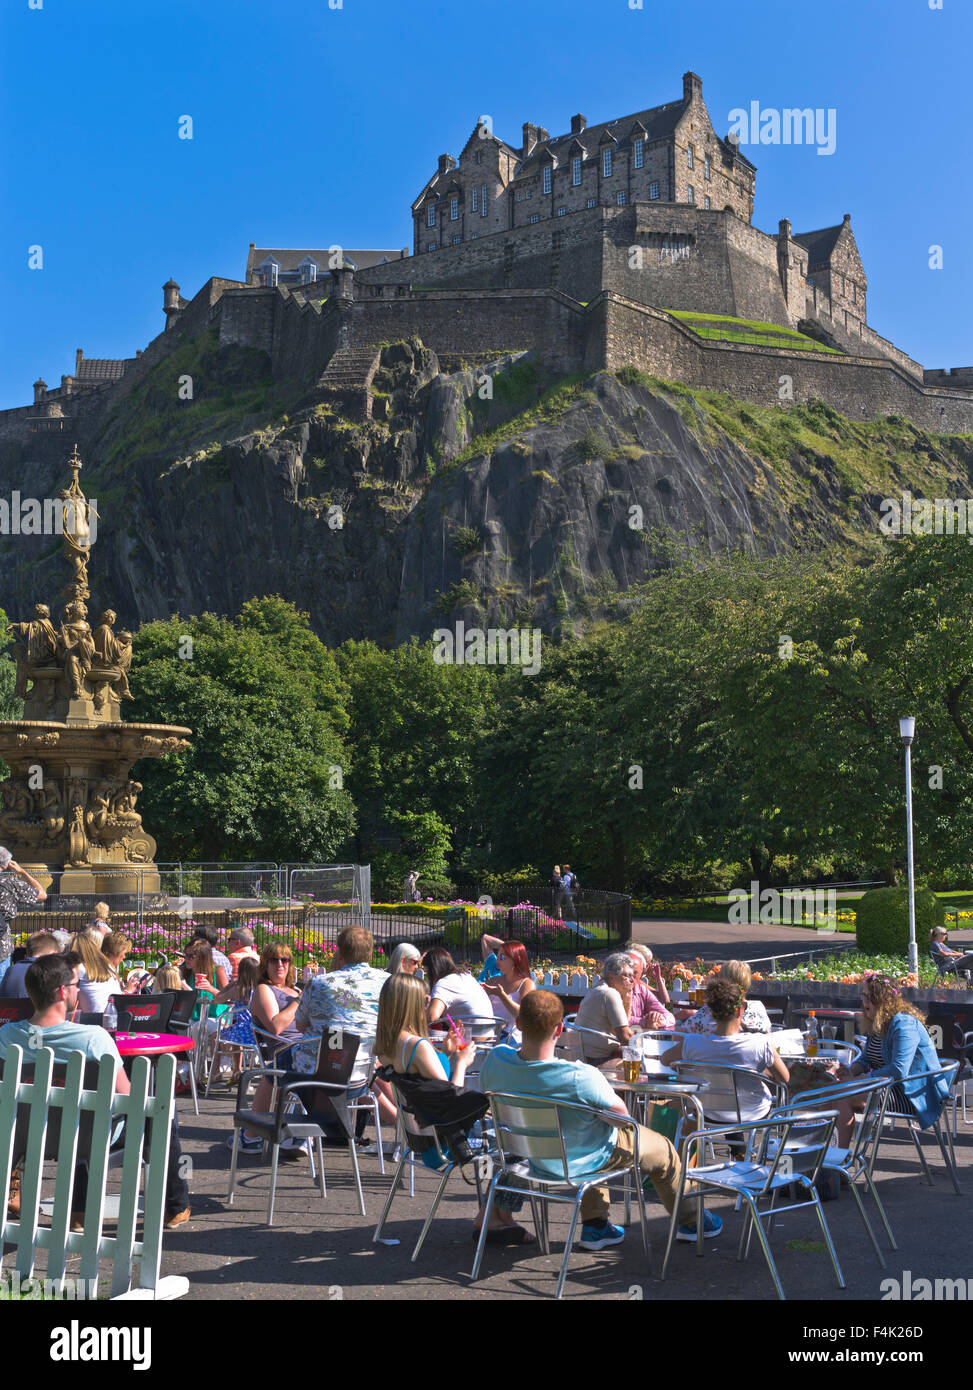 dh  PRINCES ST GARDENS EDINBURGH People relaxing summer cafe sunshine Castle scotland outdoor seating tourist day city attraction UK Stock Photo